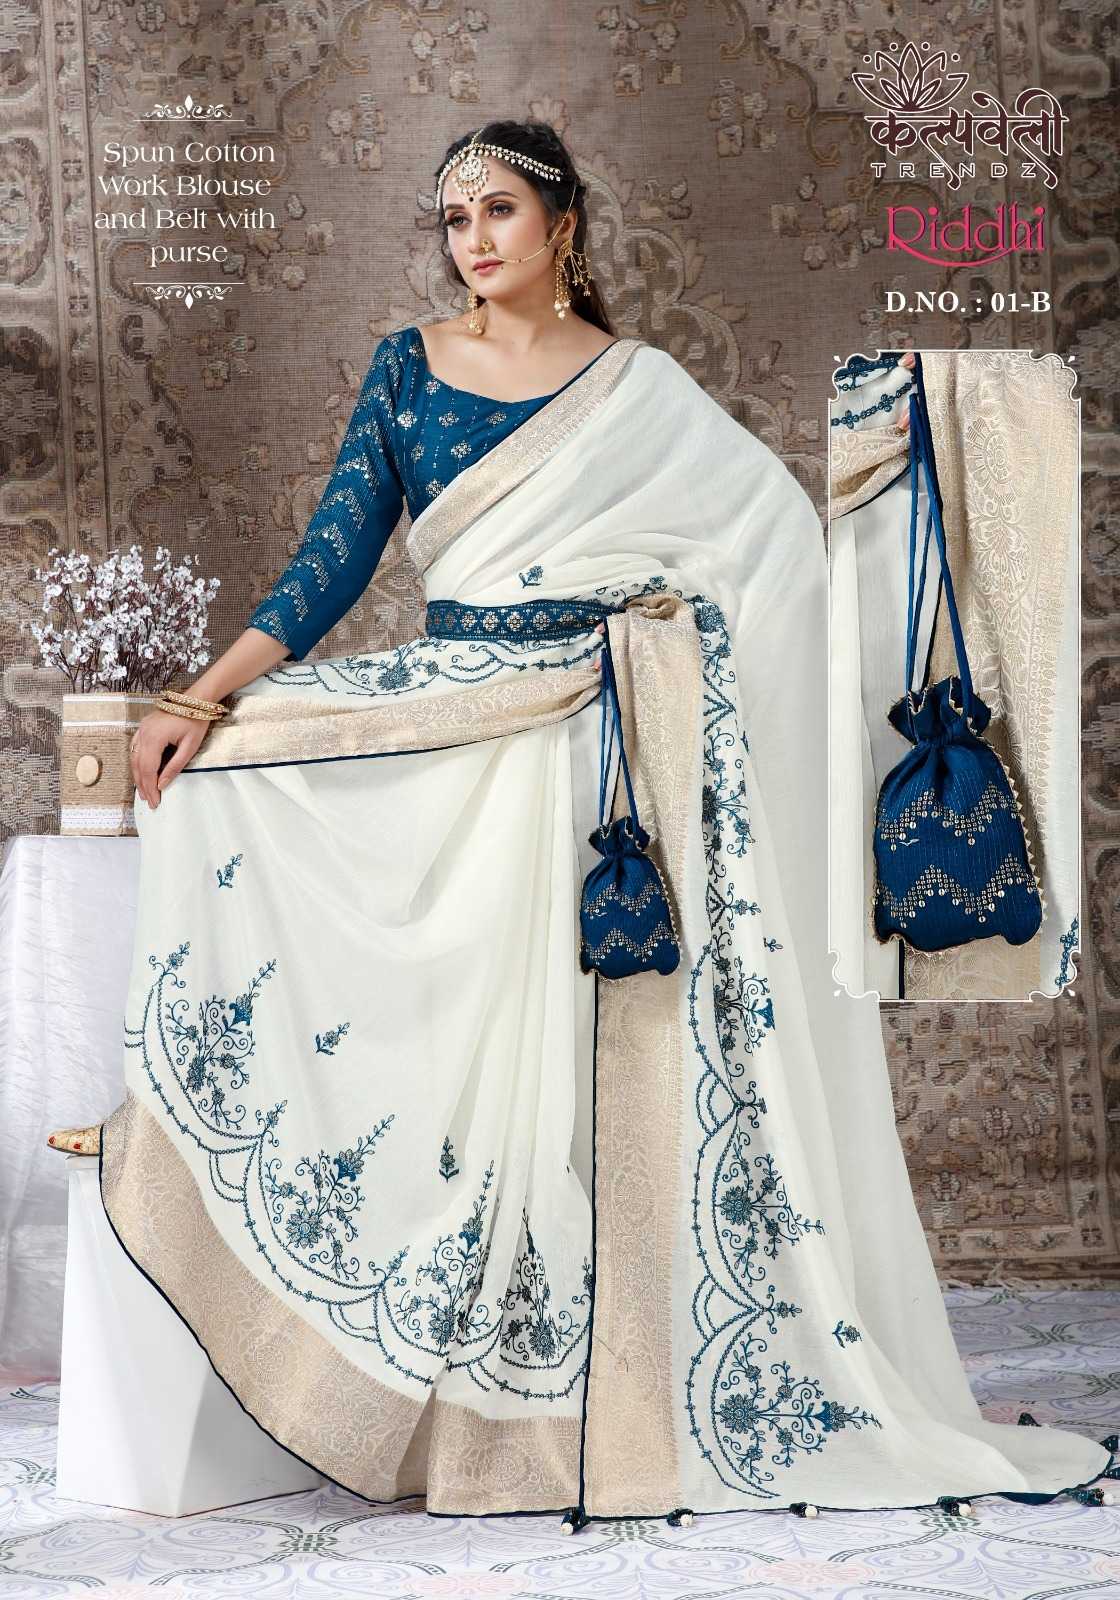 kalpavelly trendz riddhi 01 occasion wear special white designer sarees and belt with purse